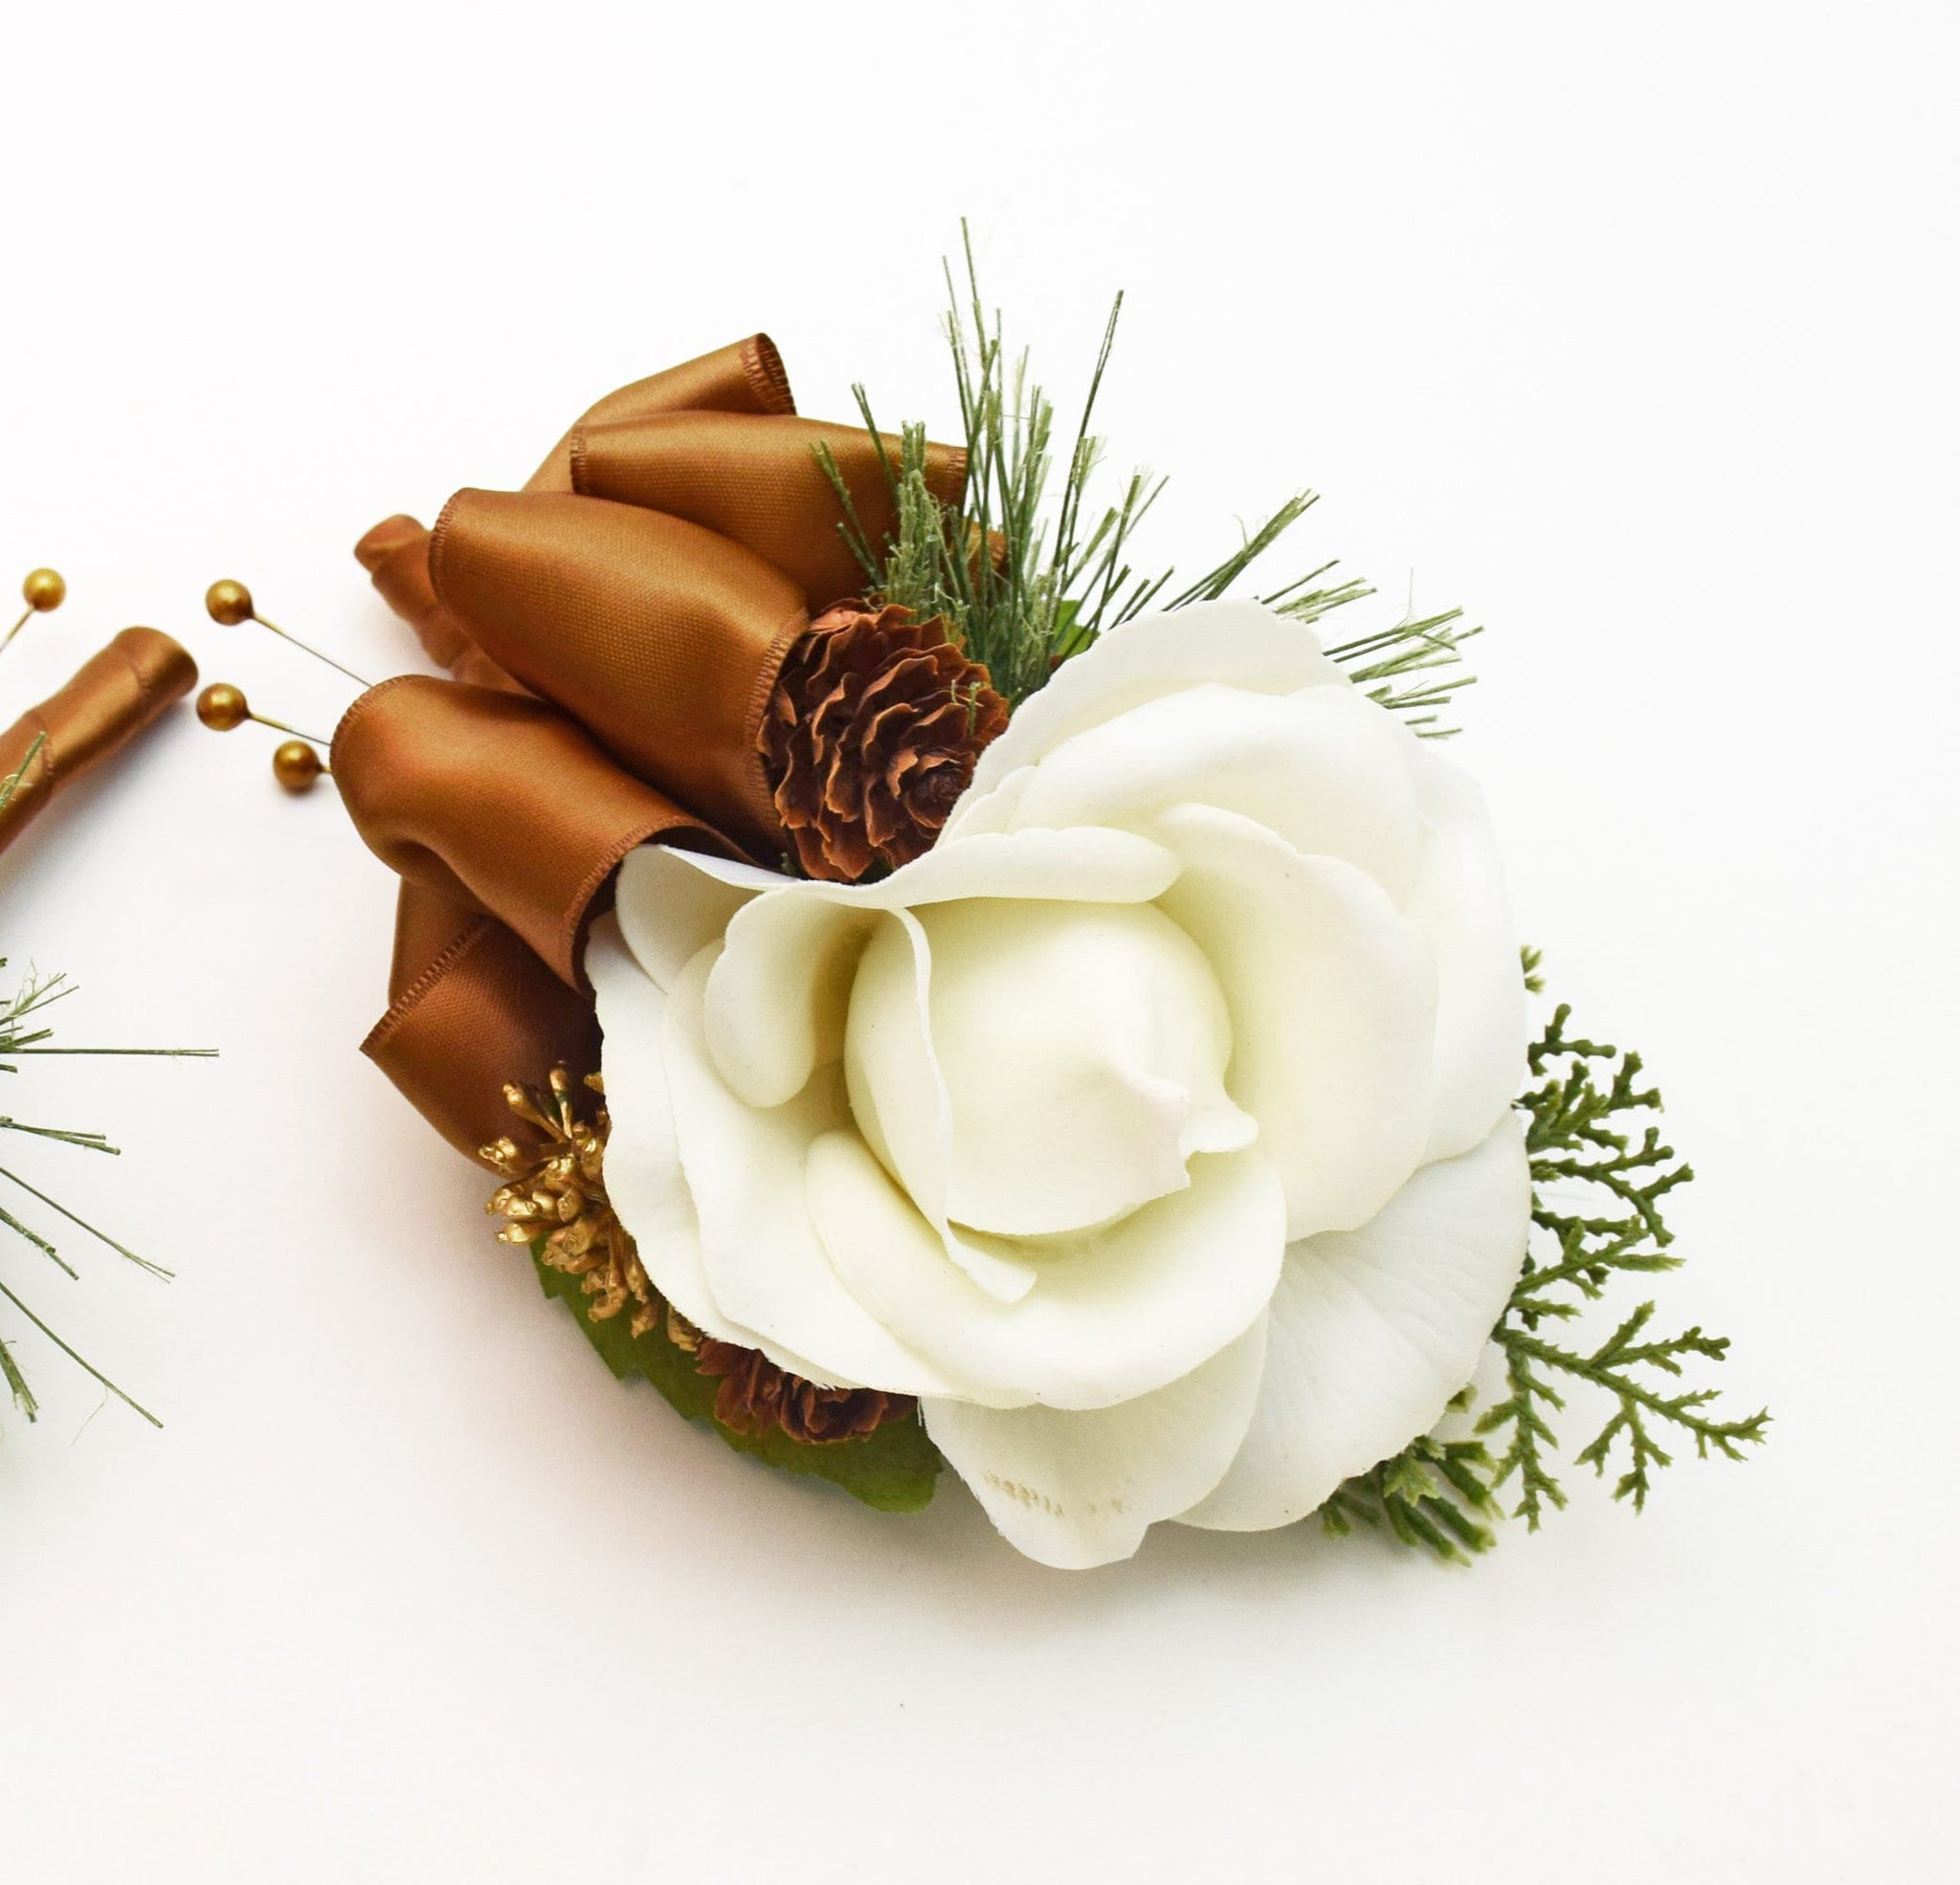 Winter Wedding Bridal Bouquet Evergreens Gold & White Bouquet Eucalyptus Pine Cones Real Touch Roses - add a Groom's Boutonniere and More!